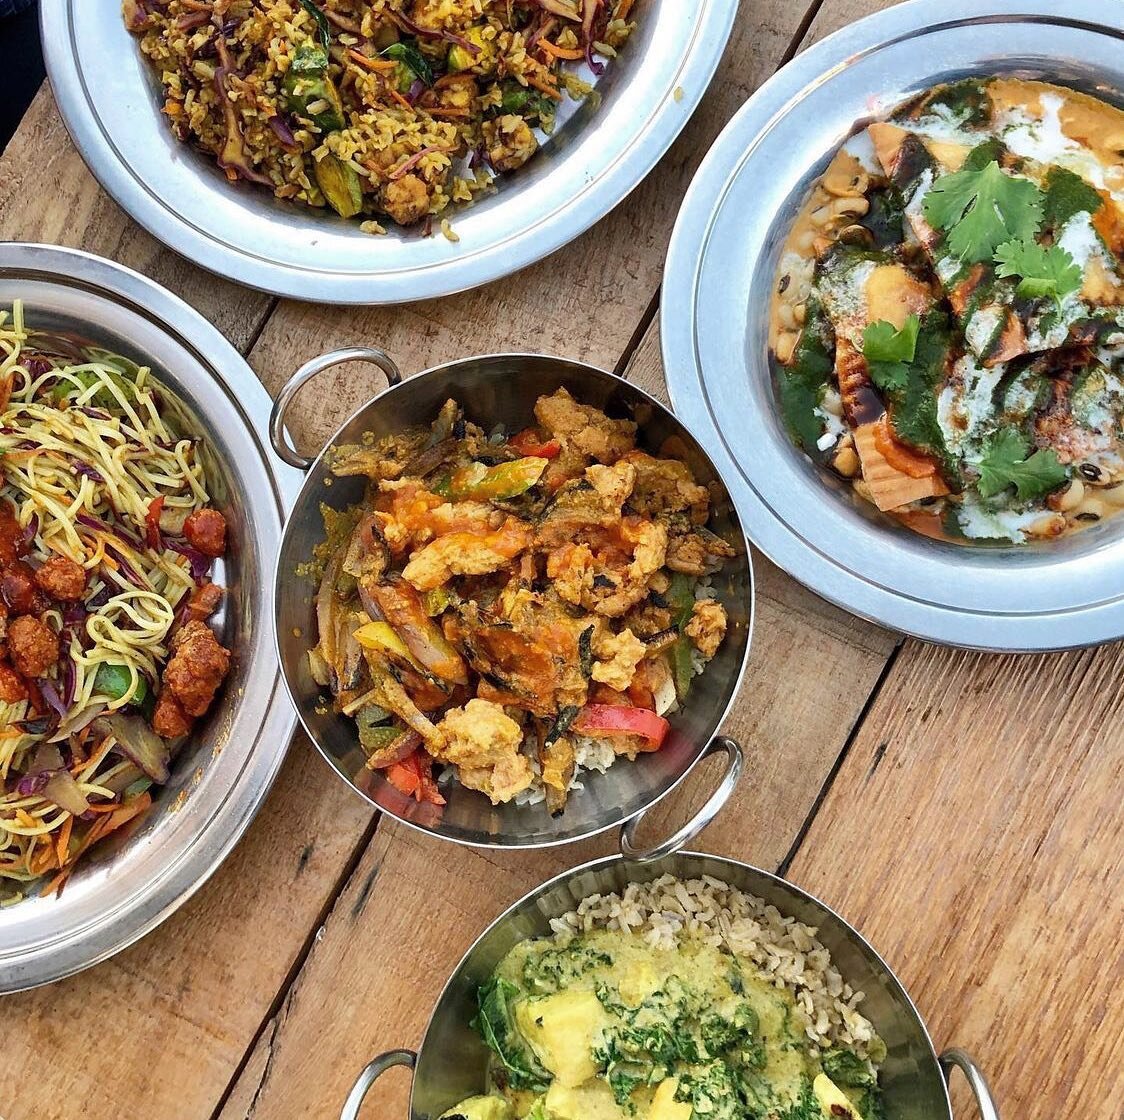 Name these dishes! 👇
Open til 10 pm every day. Food cooked by our team, photo taken by @jamwithyam. ⚡️ We love seeing your photos! #thesudrapdx